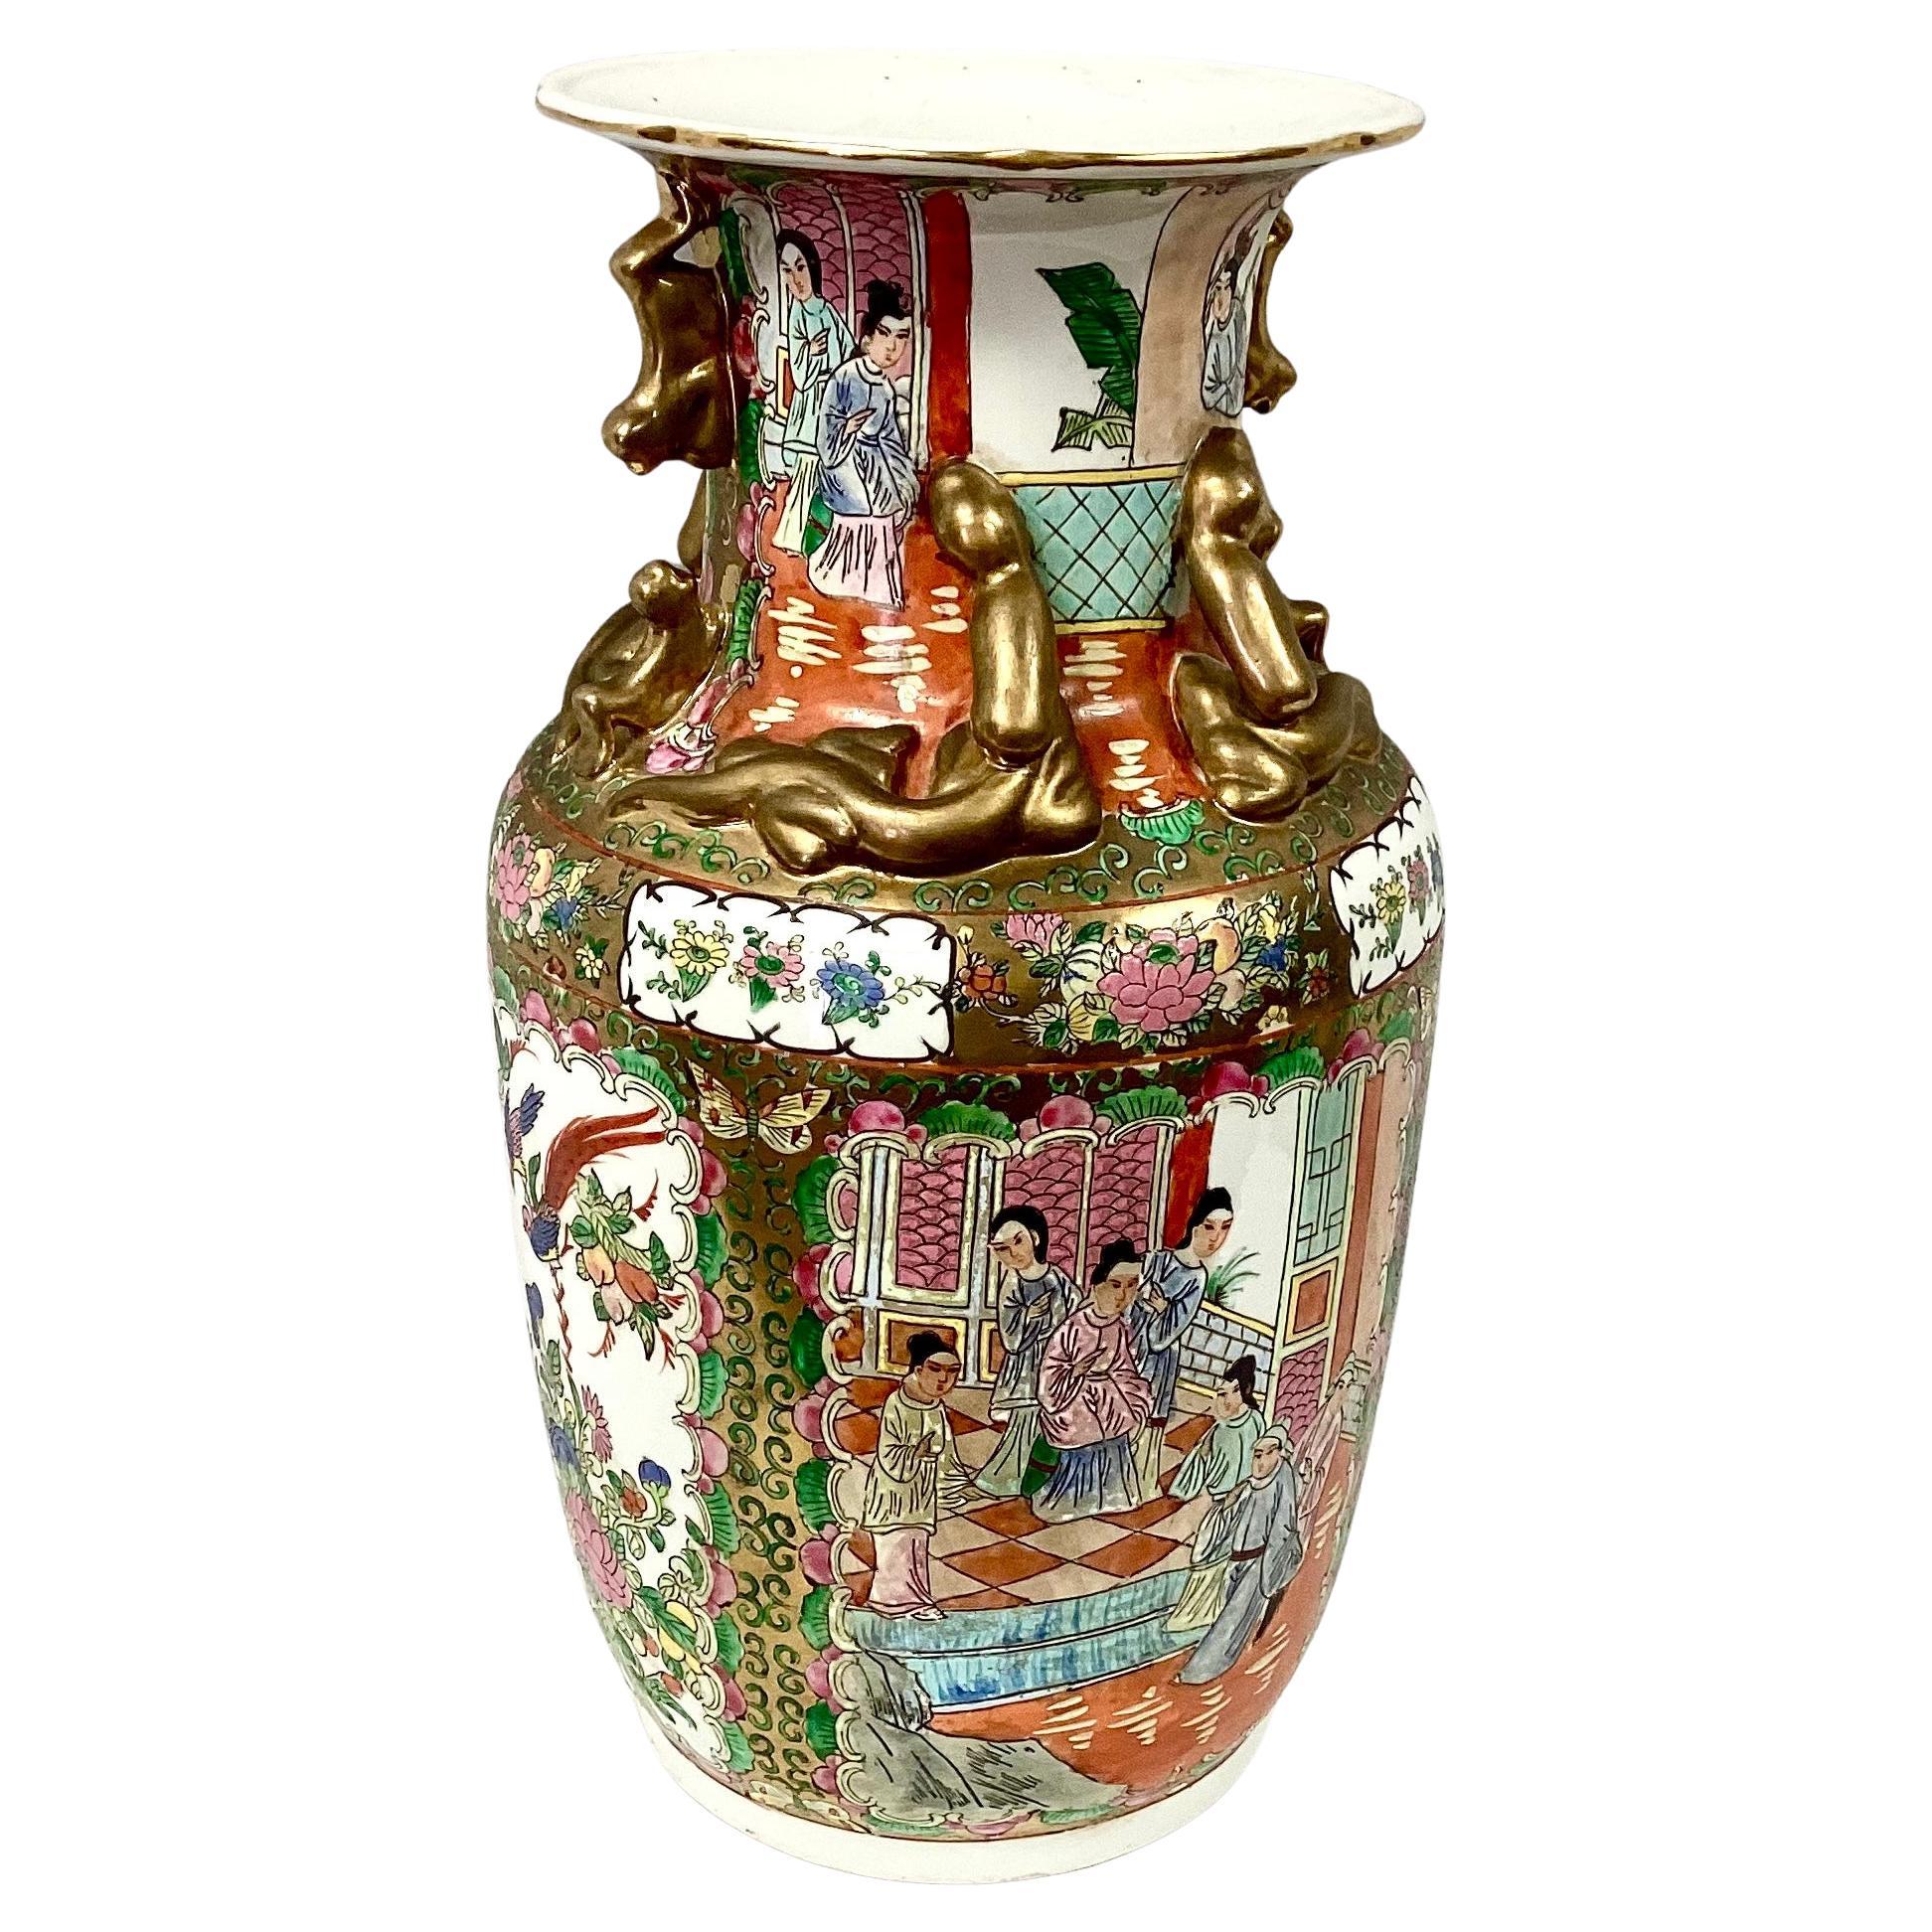 Chinese Famille Rose porcelain vase. Decorated with birds, flowers, and figures of the era with gold figures on neck and gold trim. Chinese signature mark on bottom. Early 20th century.